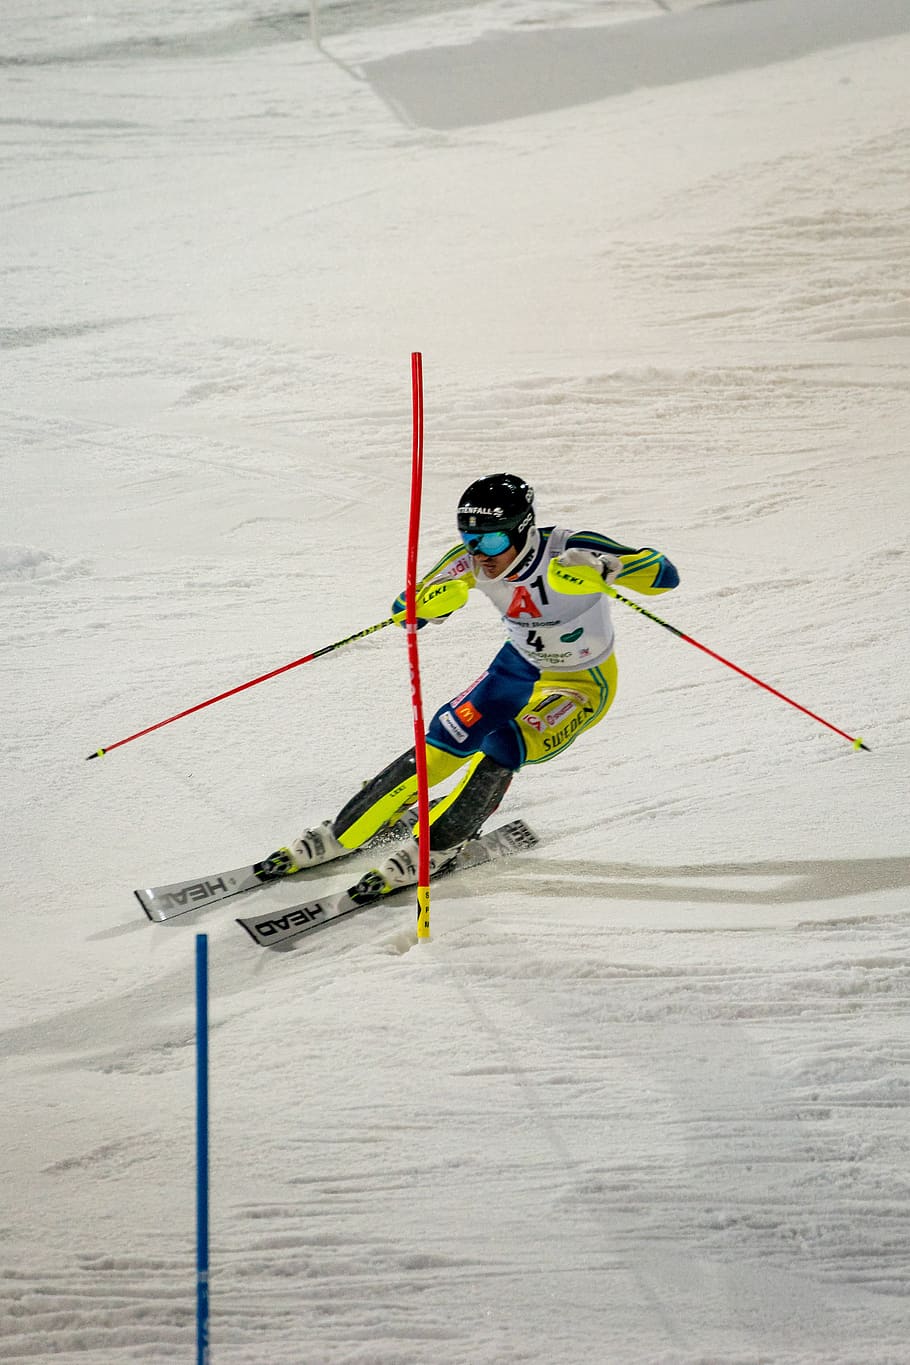 competition, hurry, race, sport, fast, slalom, night race, skiing, ski, cold temperature